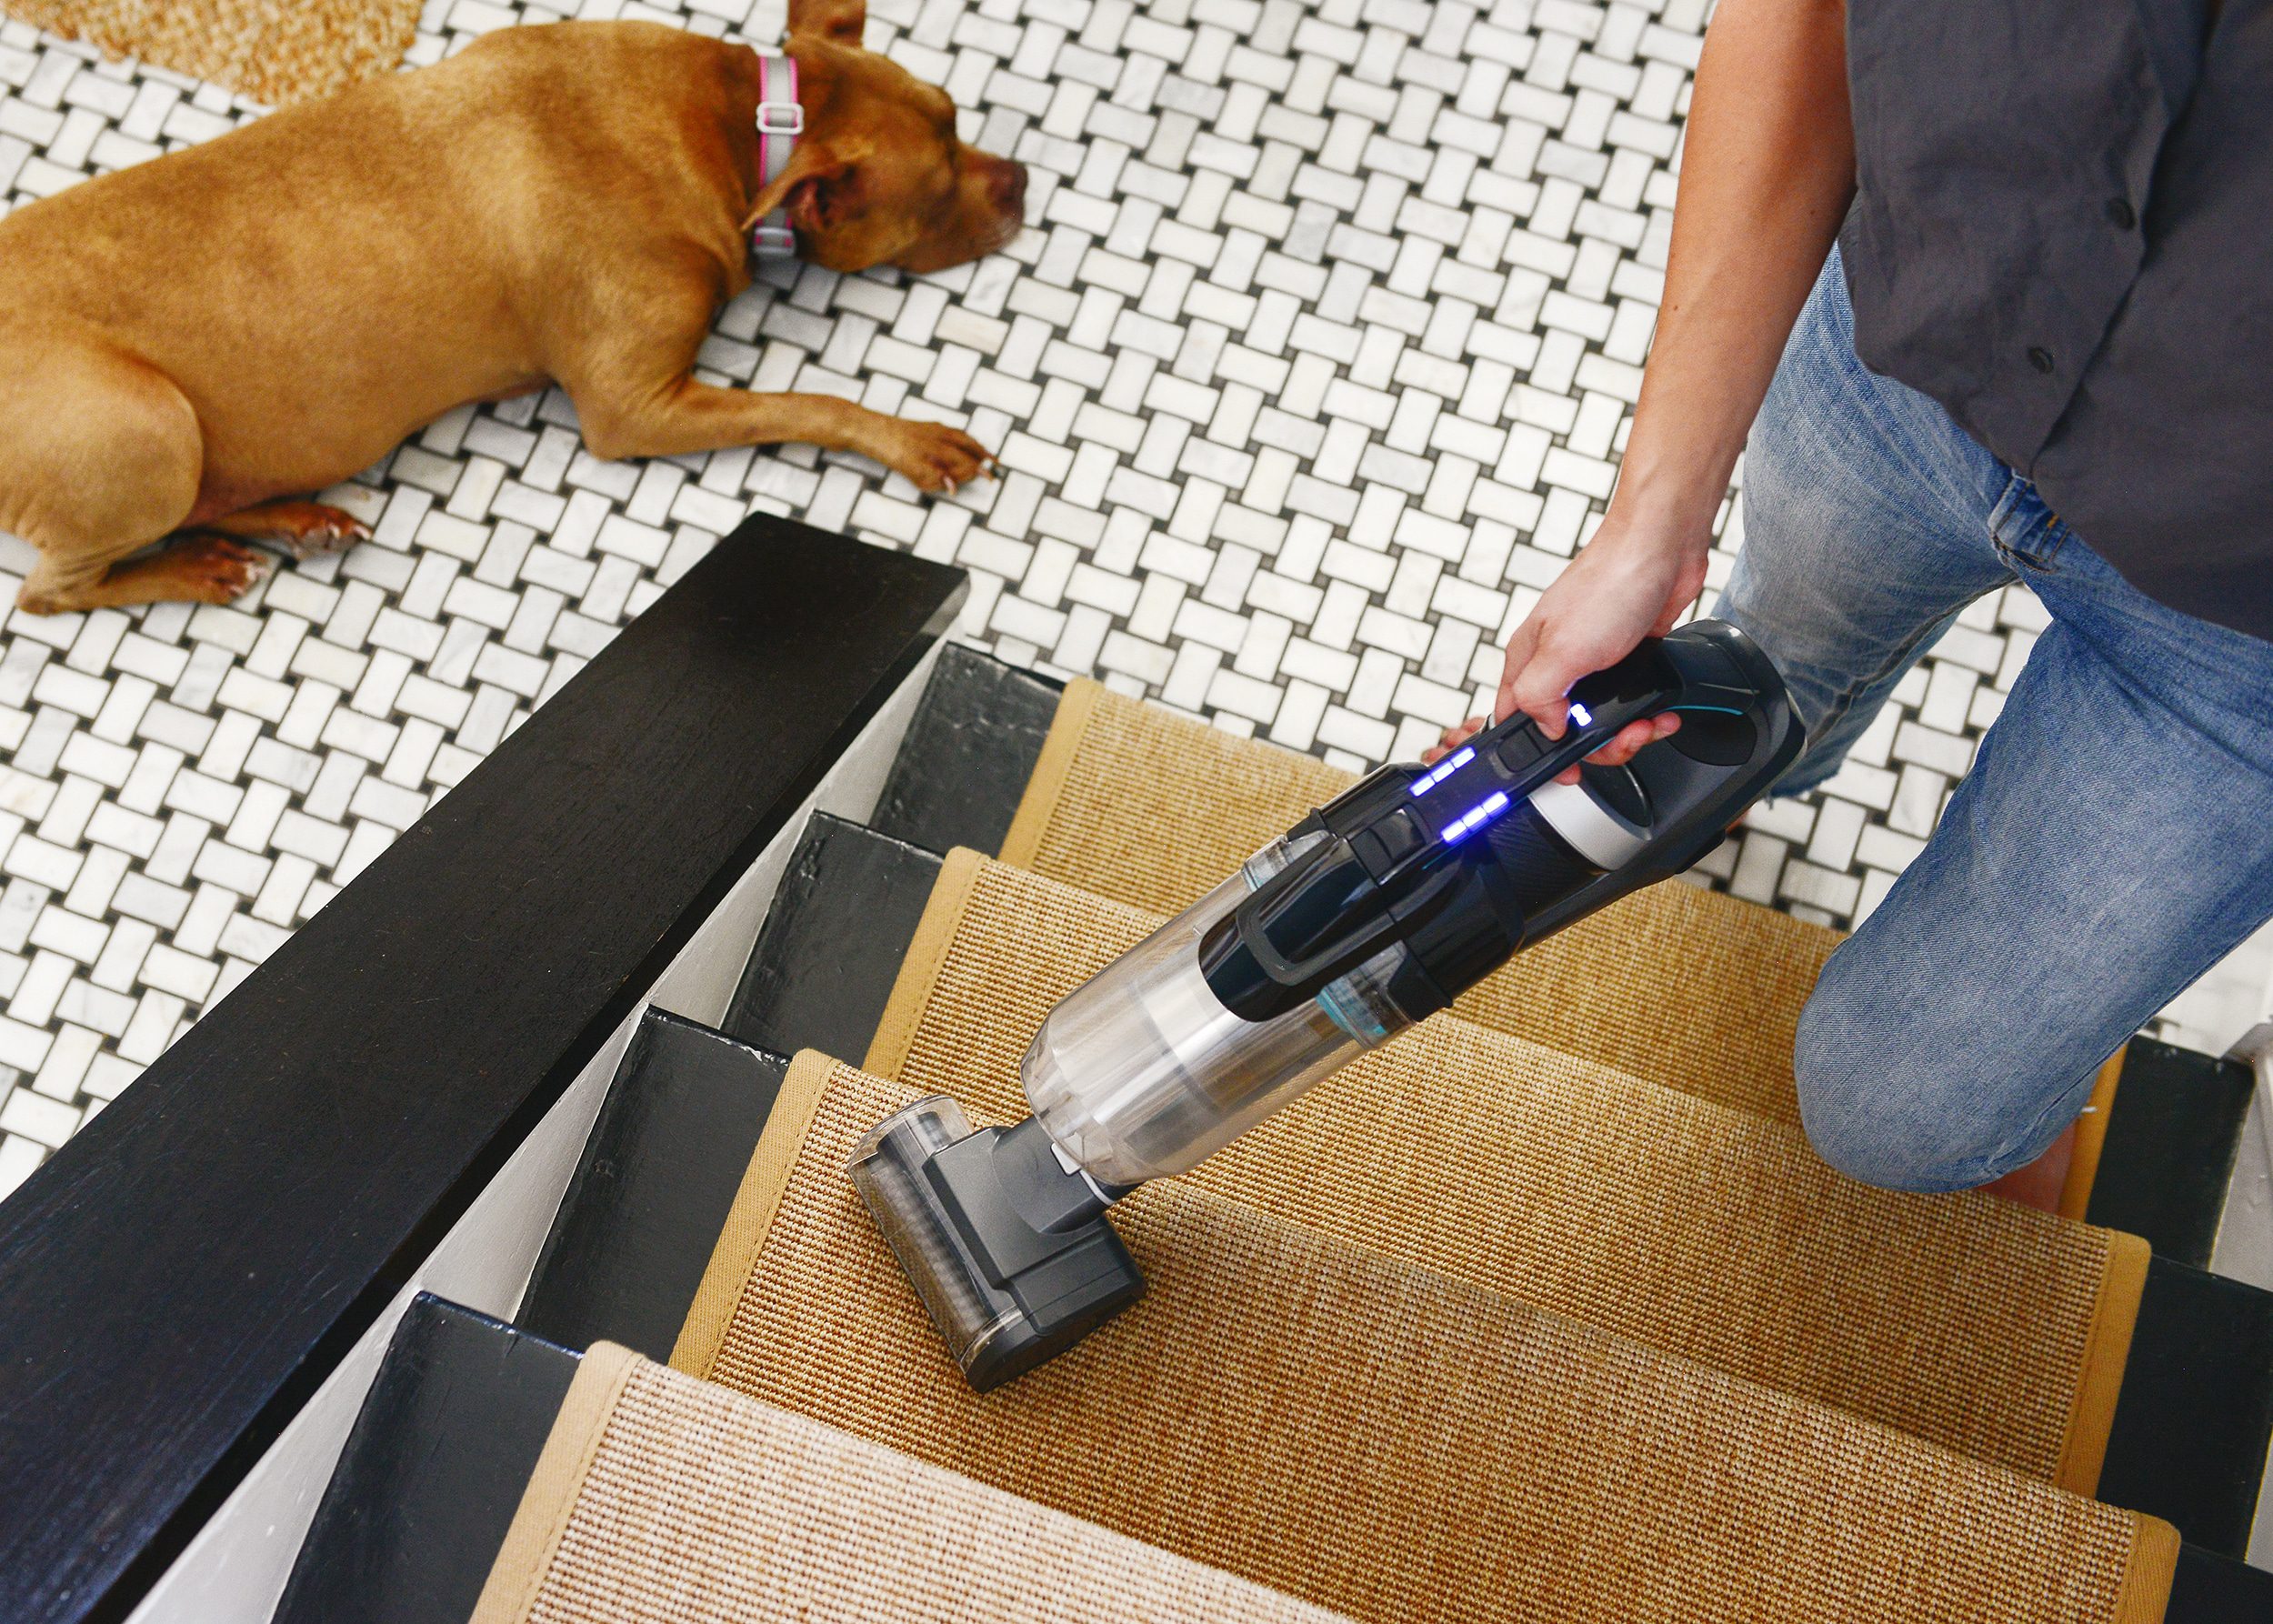 How we use the BISSELL ICONpet cordless vacuum to keep pet hair and messes to a minimum | via Yellow Brick Home #BISSELL #pethappens